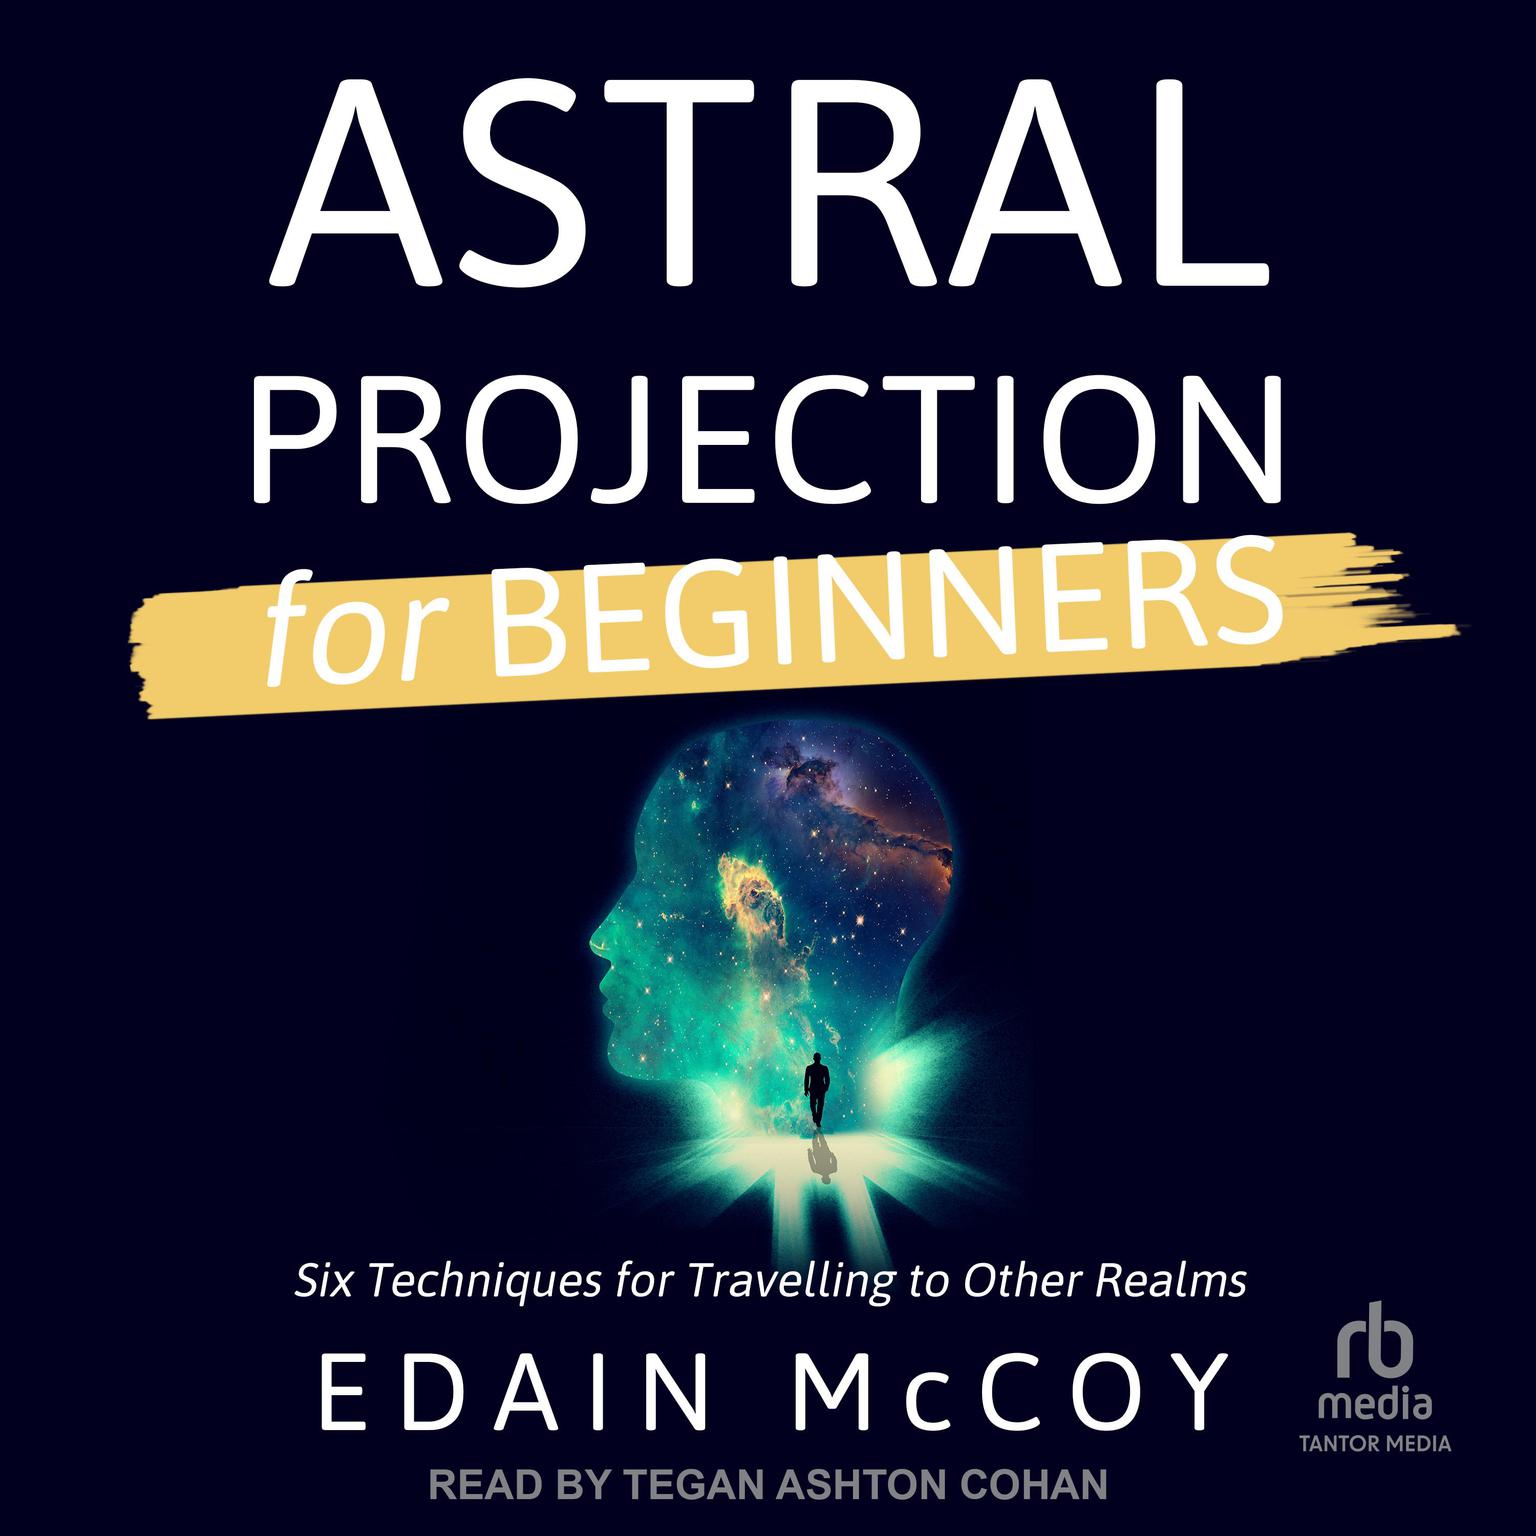 Astral Projection for Beginners: Six Techniques for Traveling to Other Realms Audiobook, by Edain McCoy